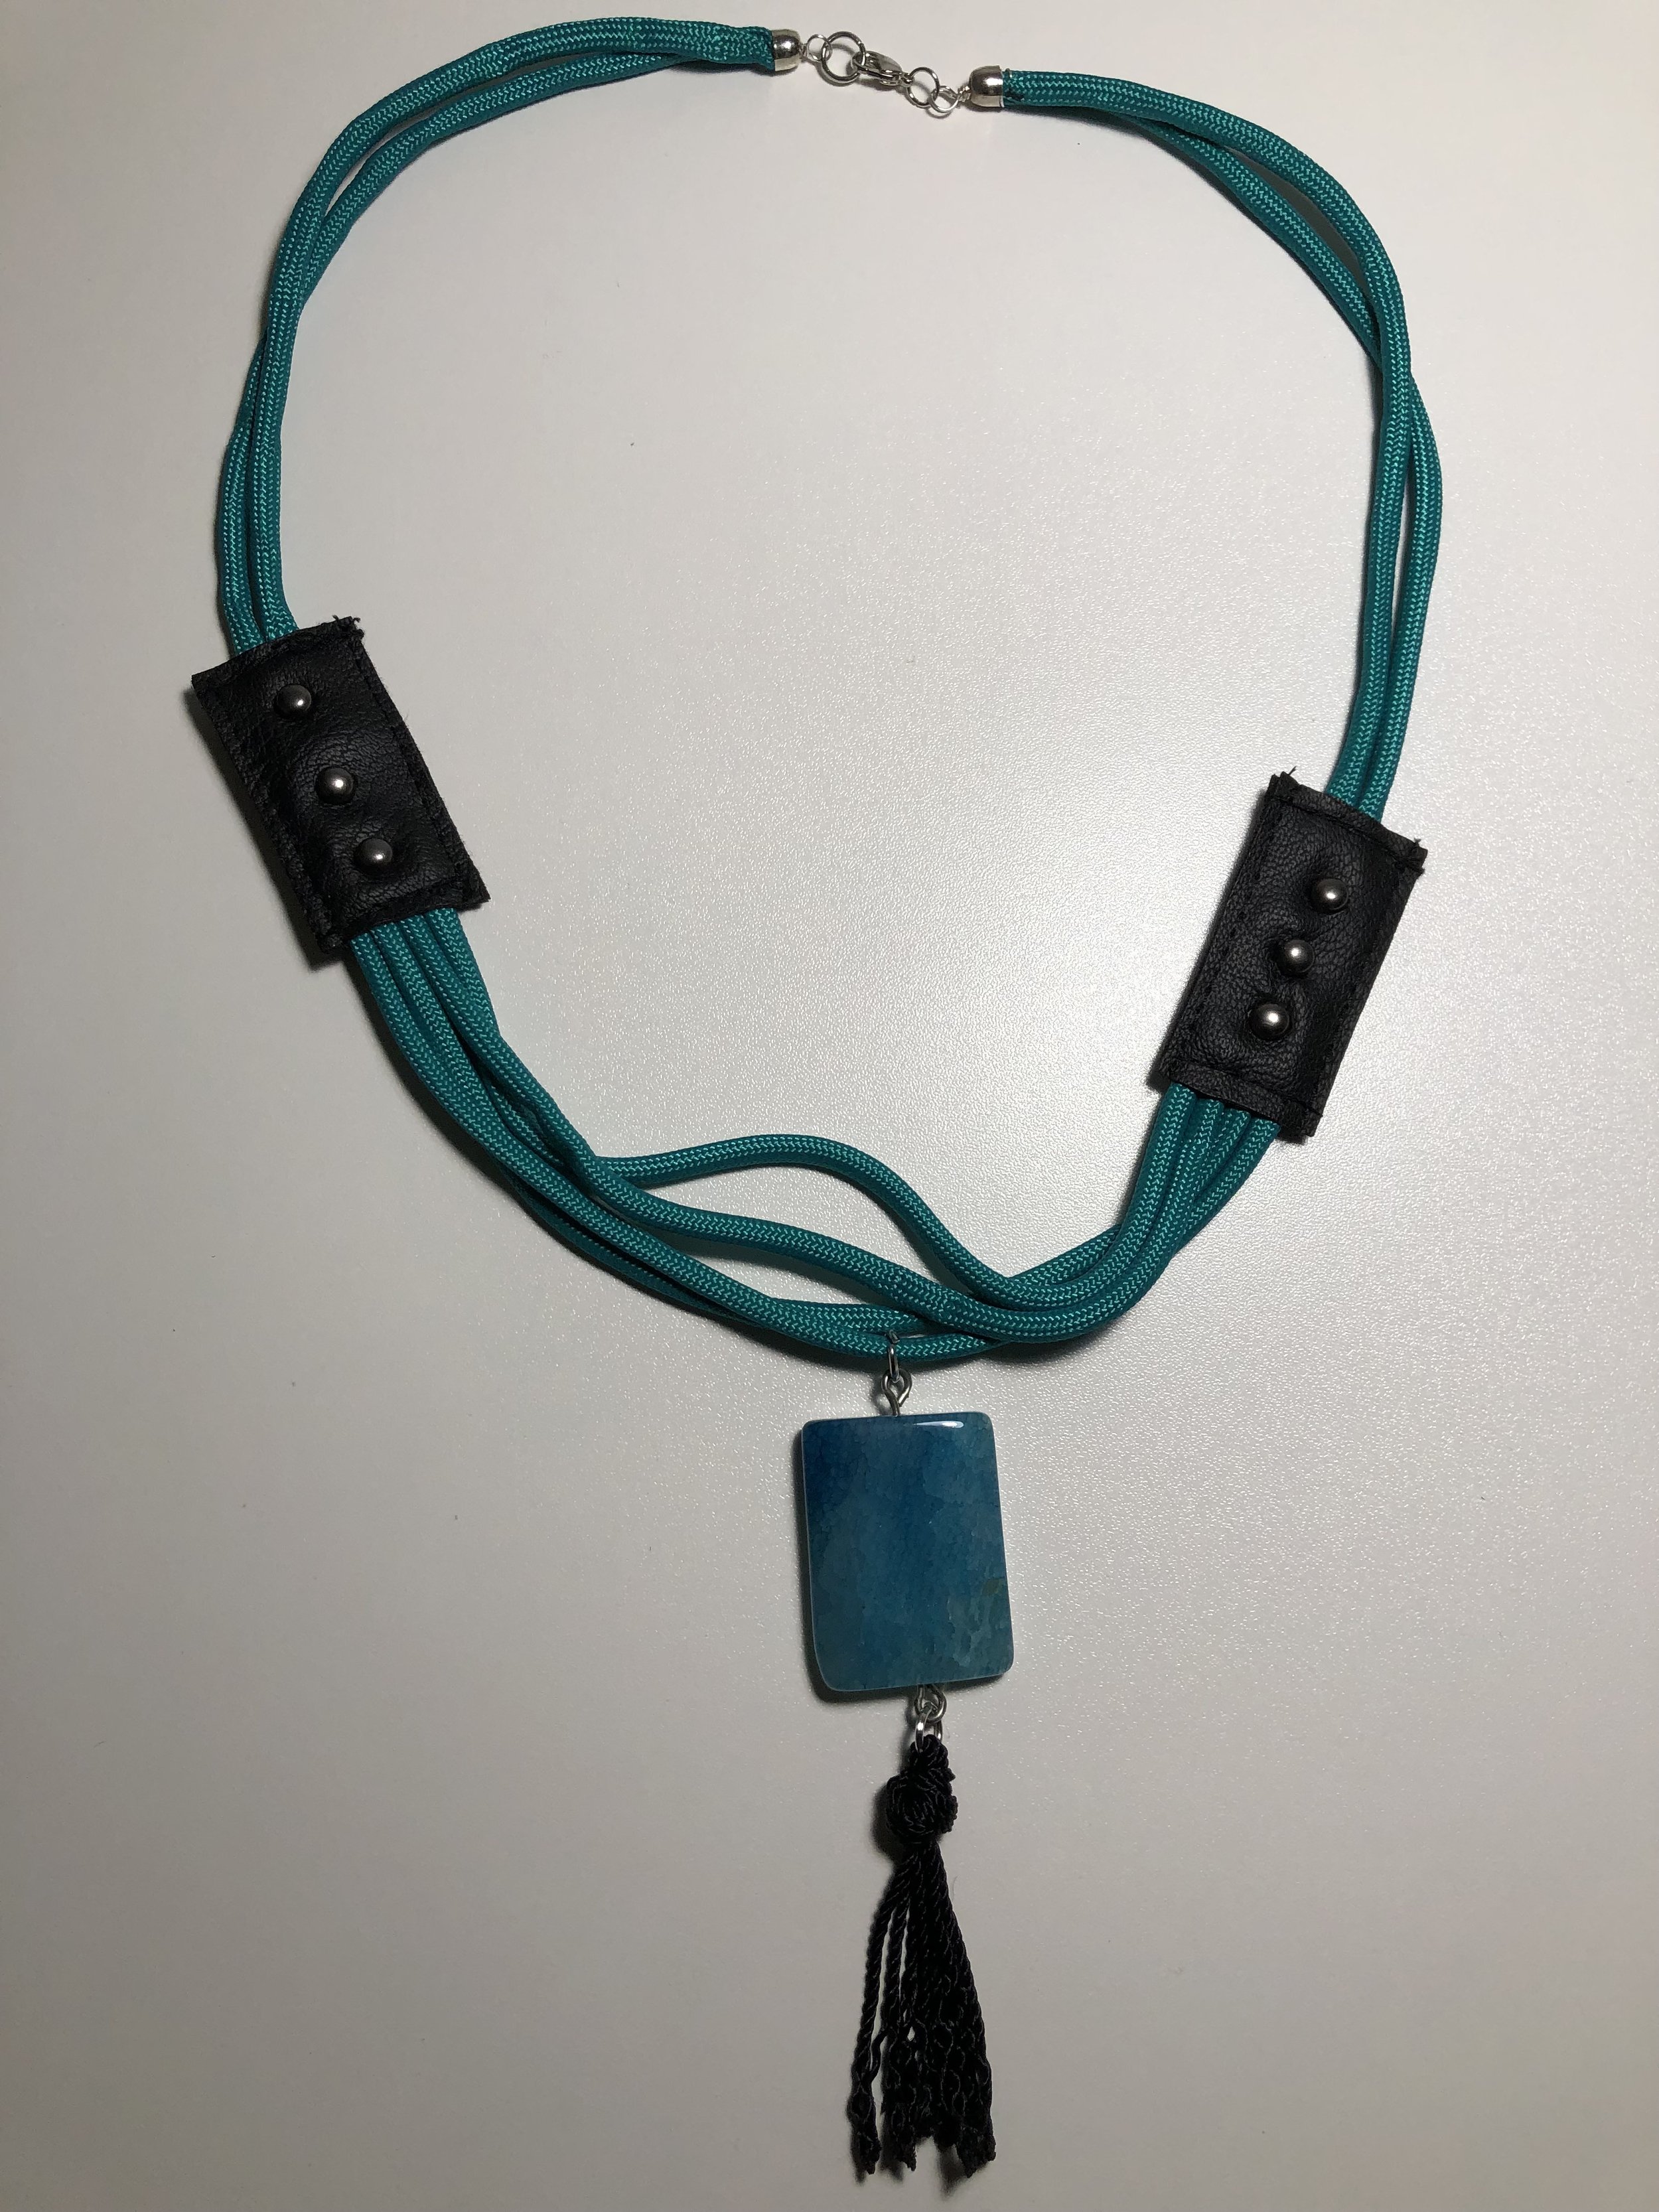 Multi-strand square turquoise necklace by Black & Gold Fashions (1).JPG